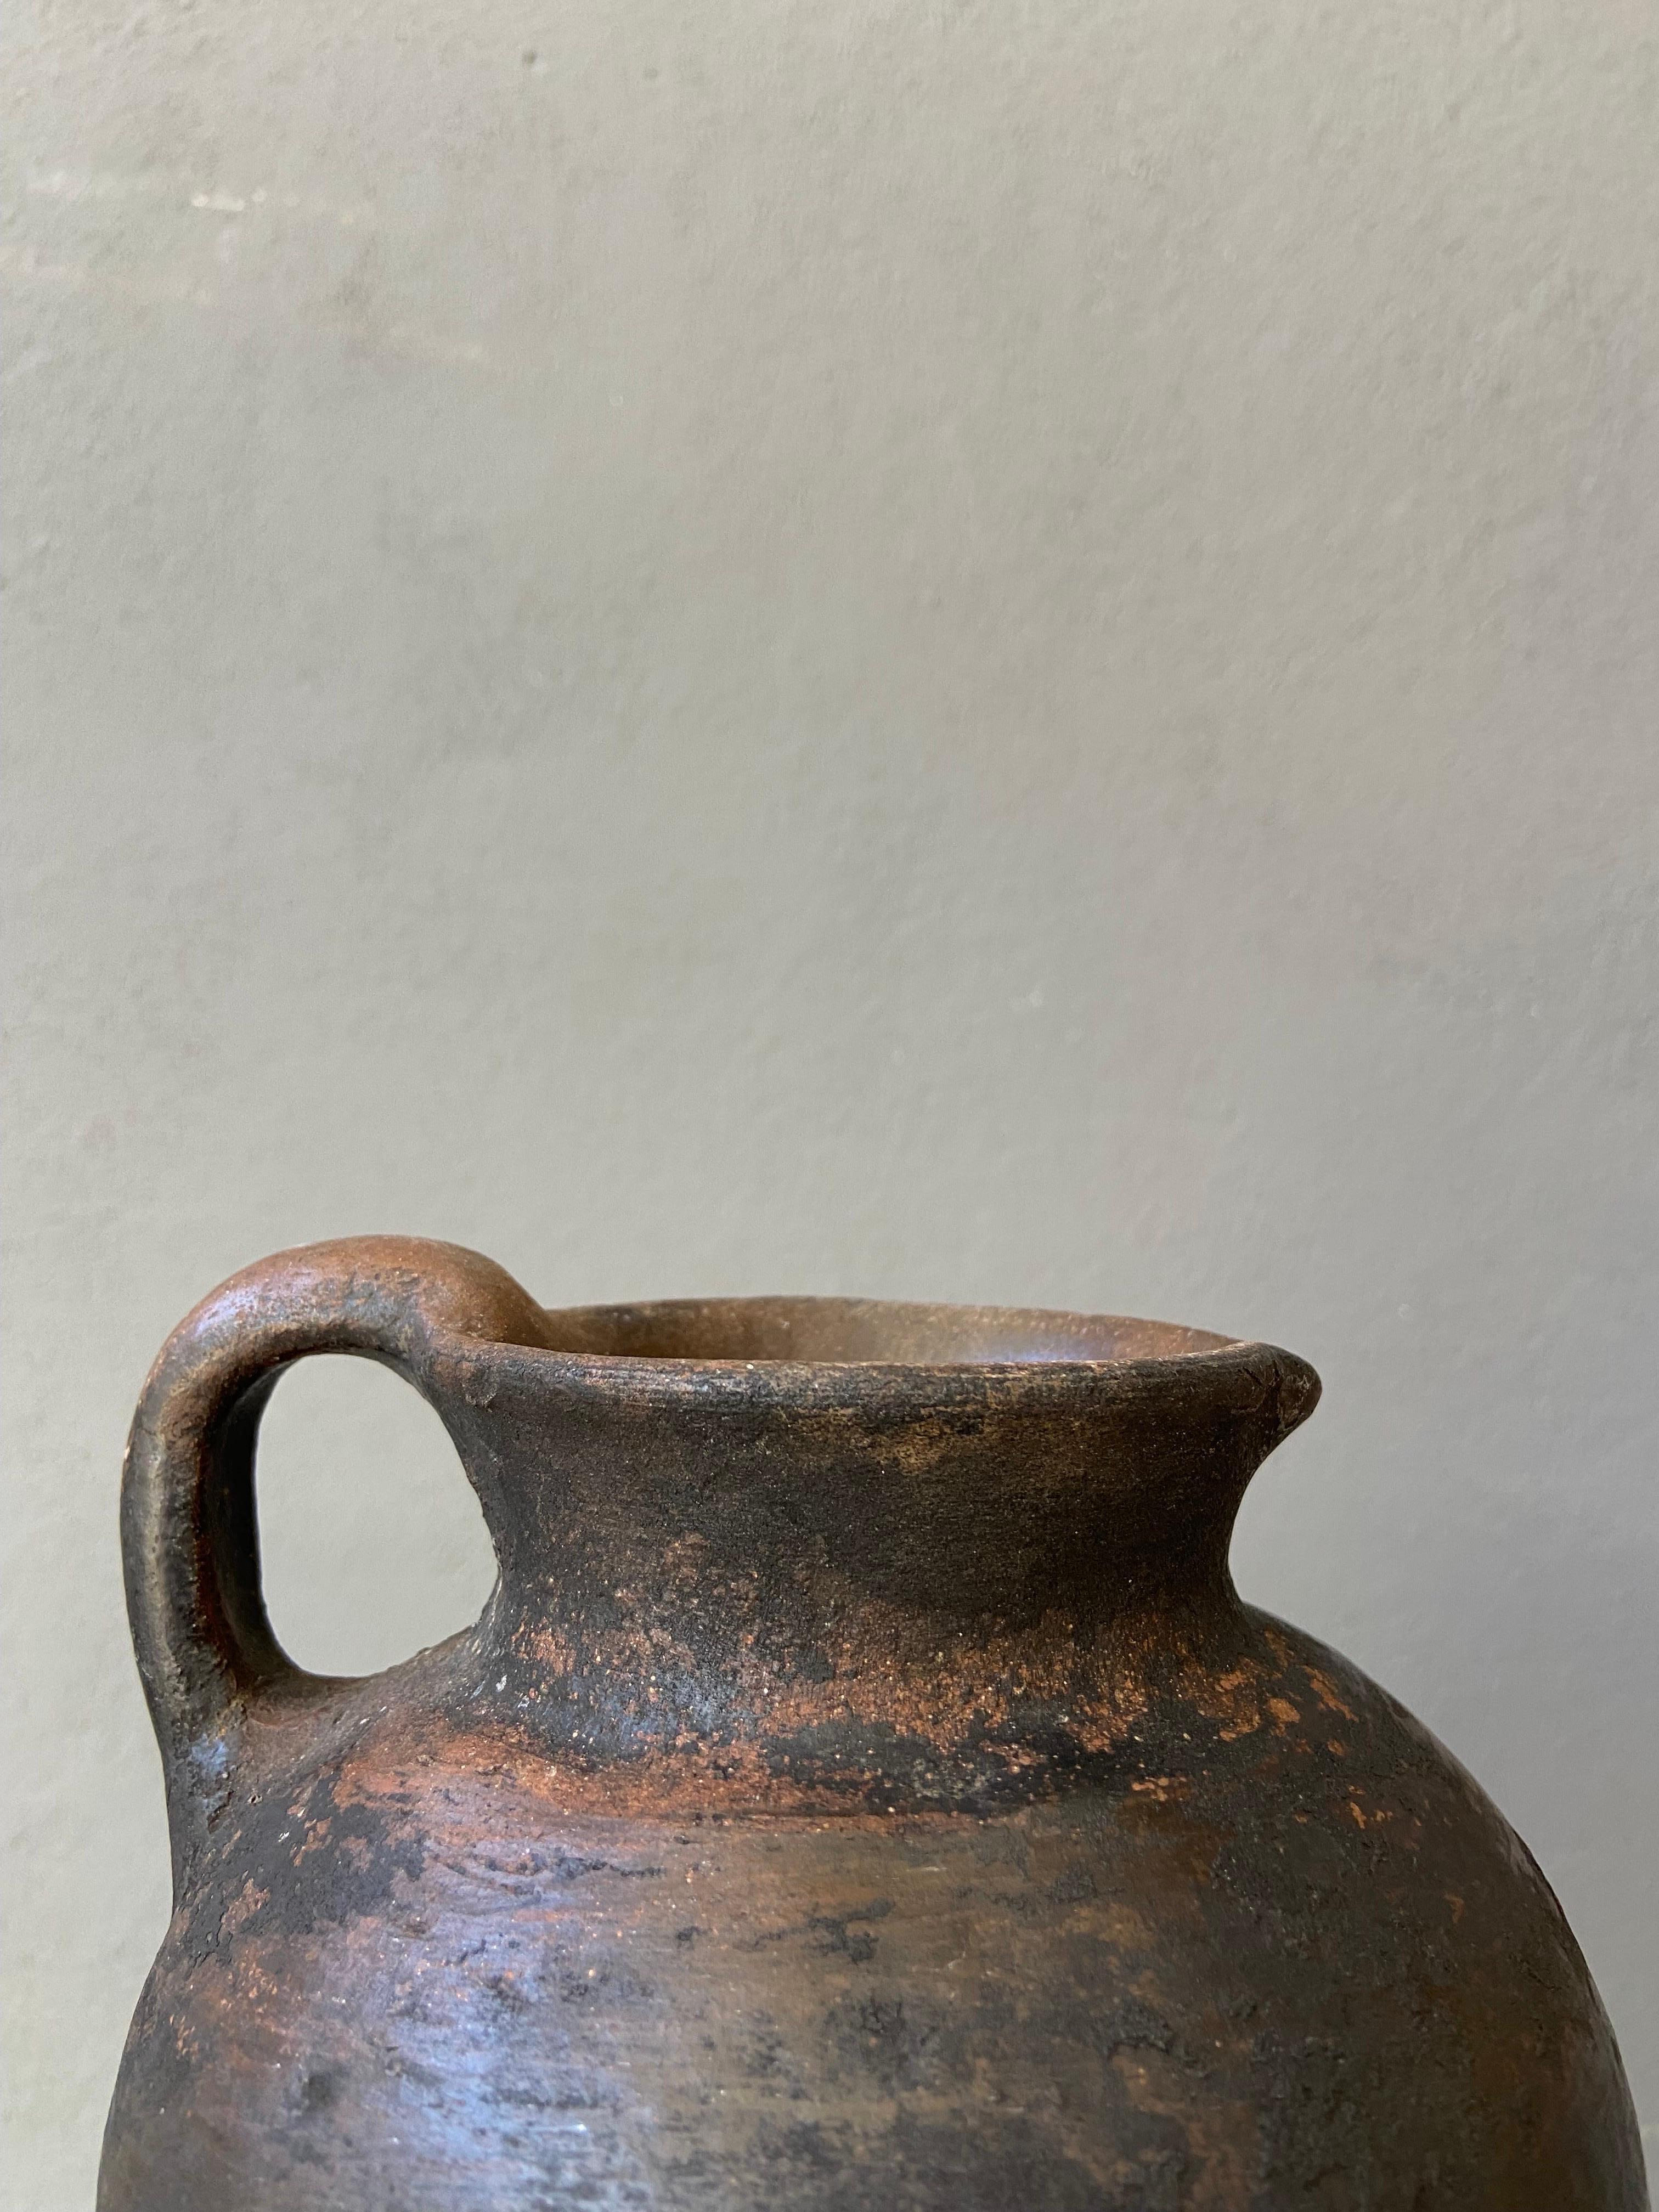 Primitive styled terracotta pitcher from the Mixteca region of Oaxaca, Mexico, circa 1970´s.